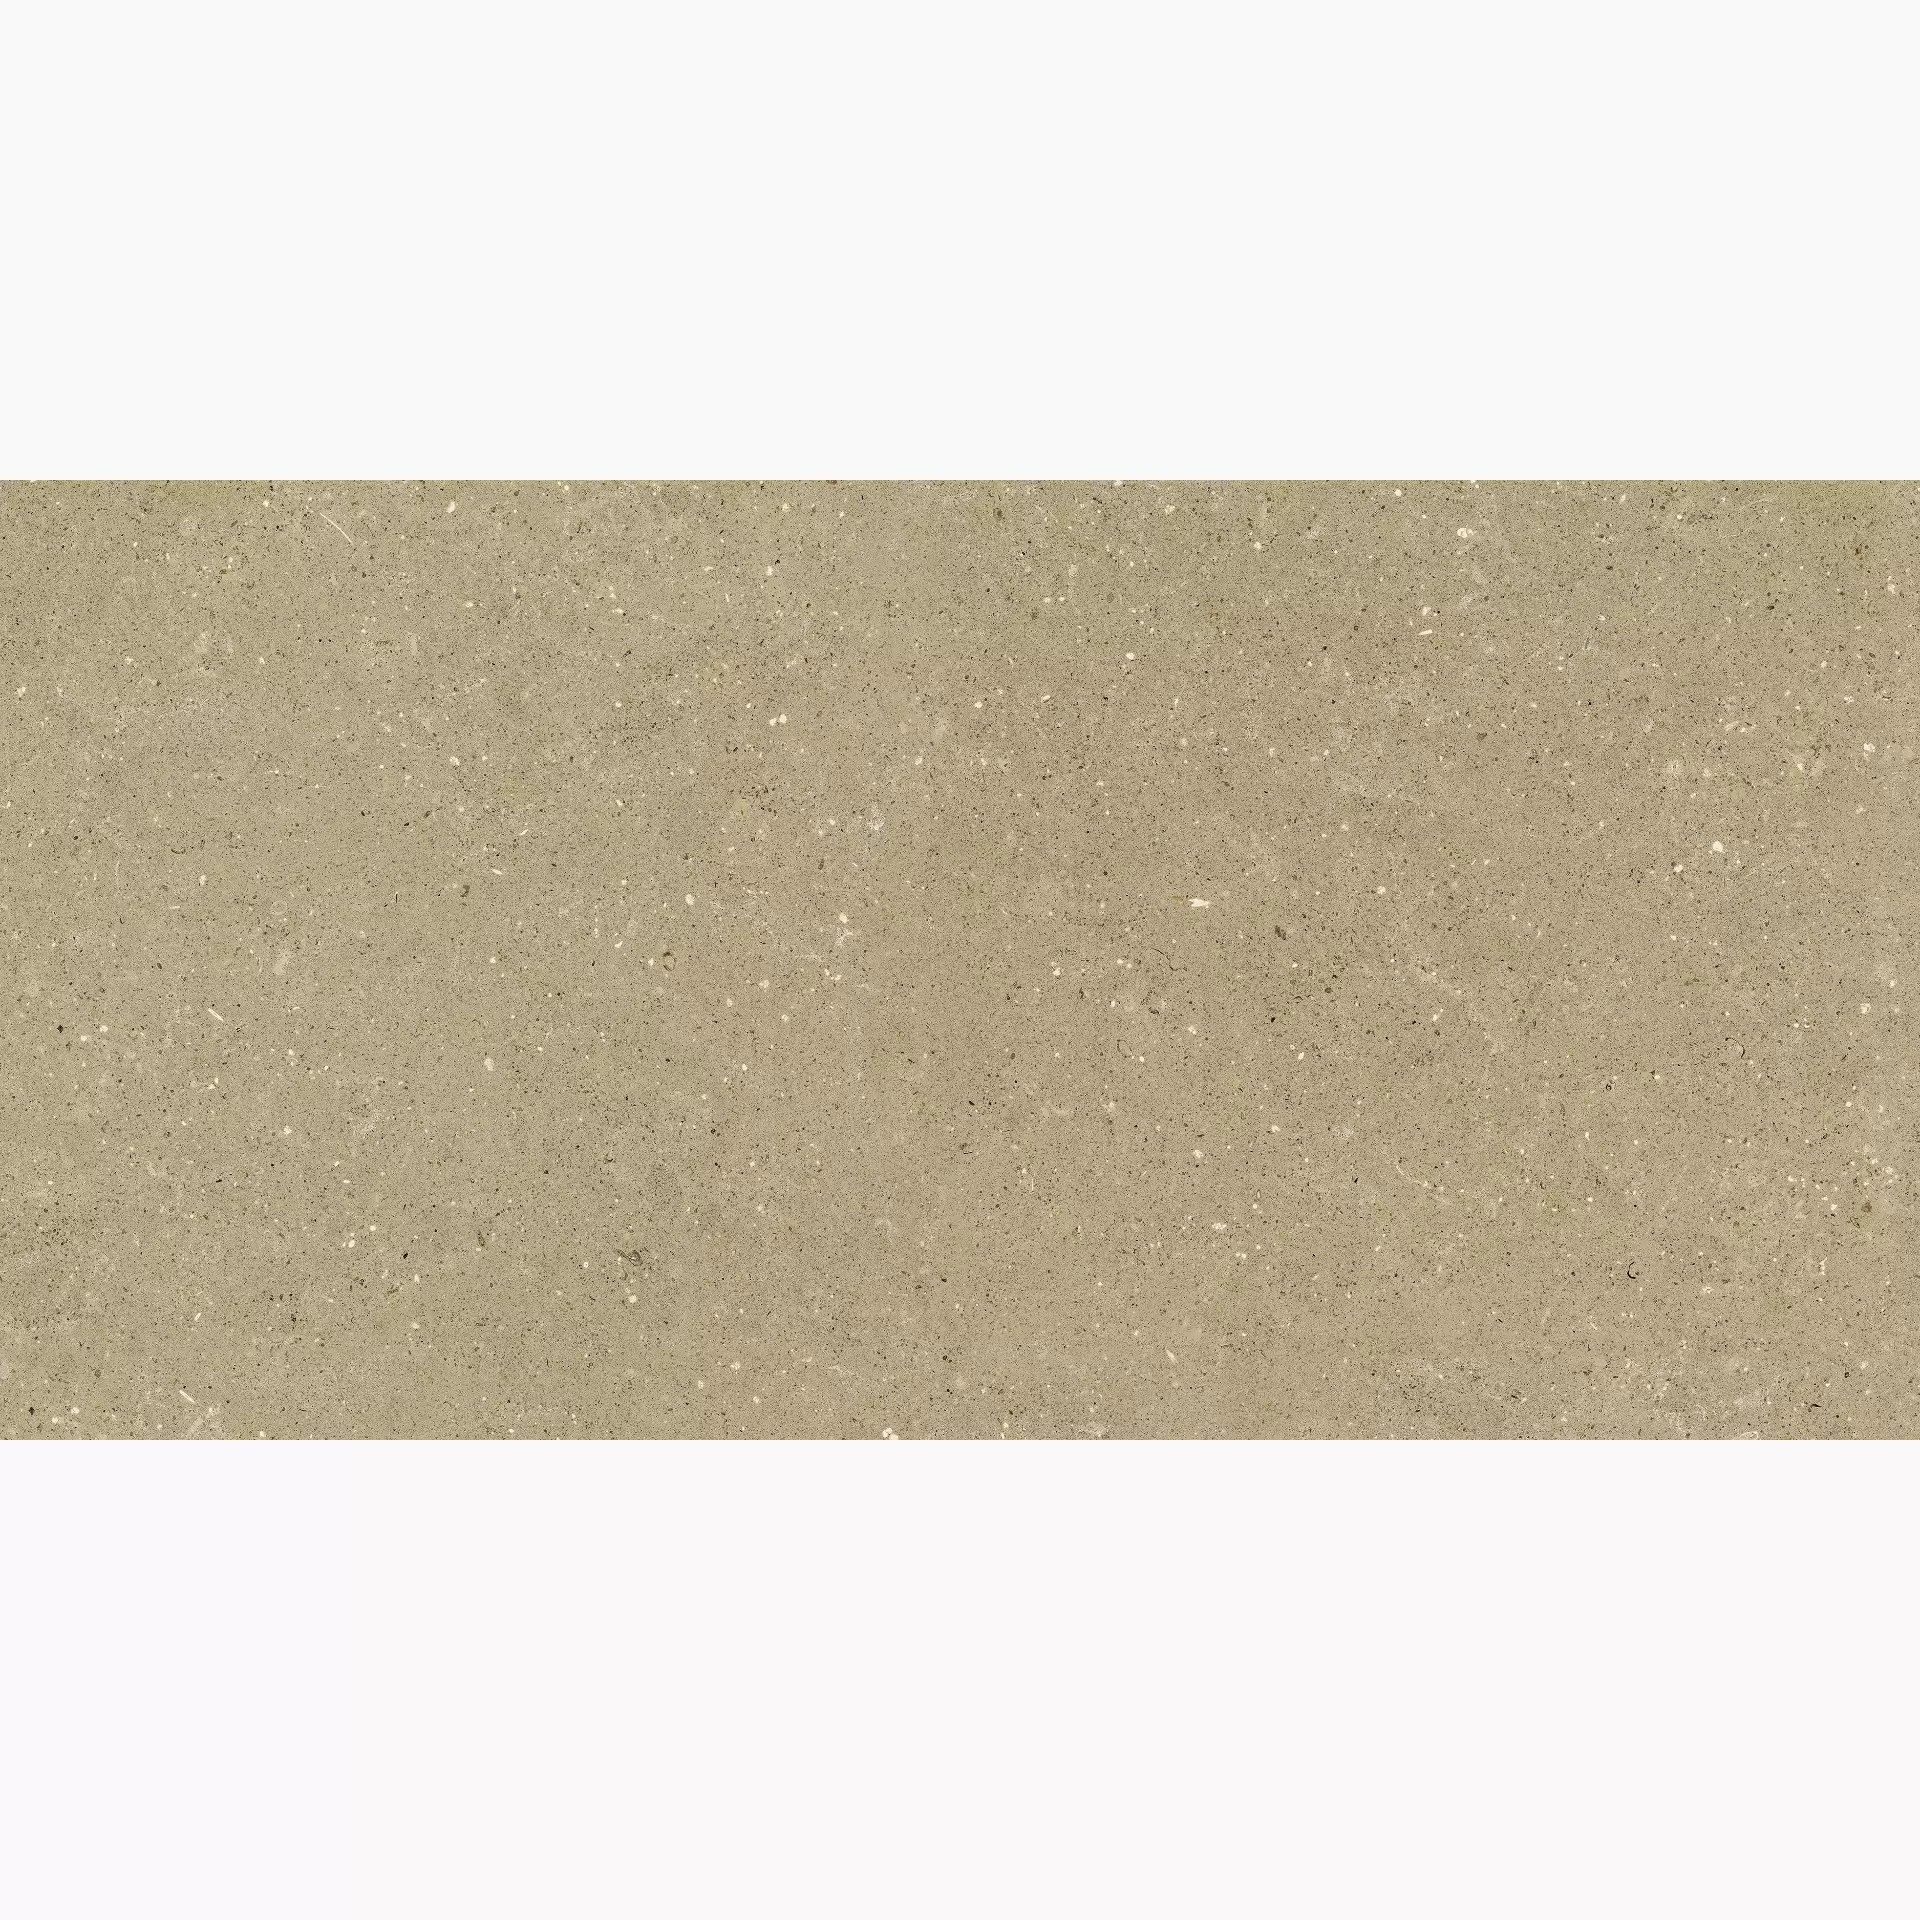 Del Conca Hwd Wild Beige Hwd Naturale Universal GCWD01MO 60x120cm rectified 8,5mm